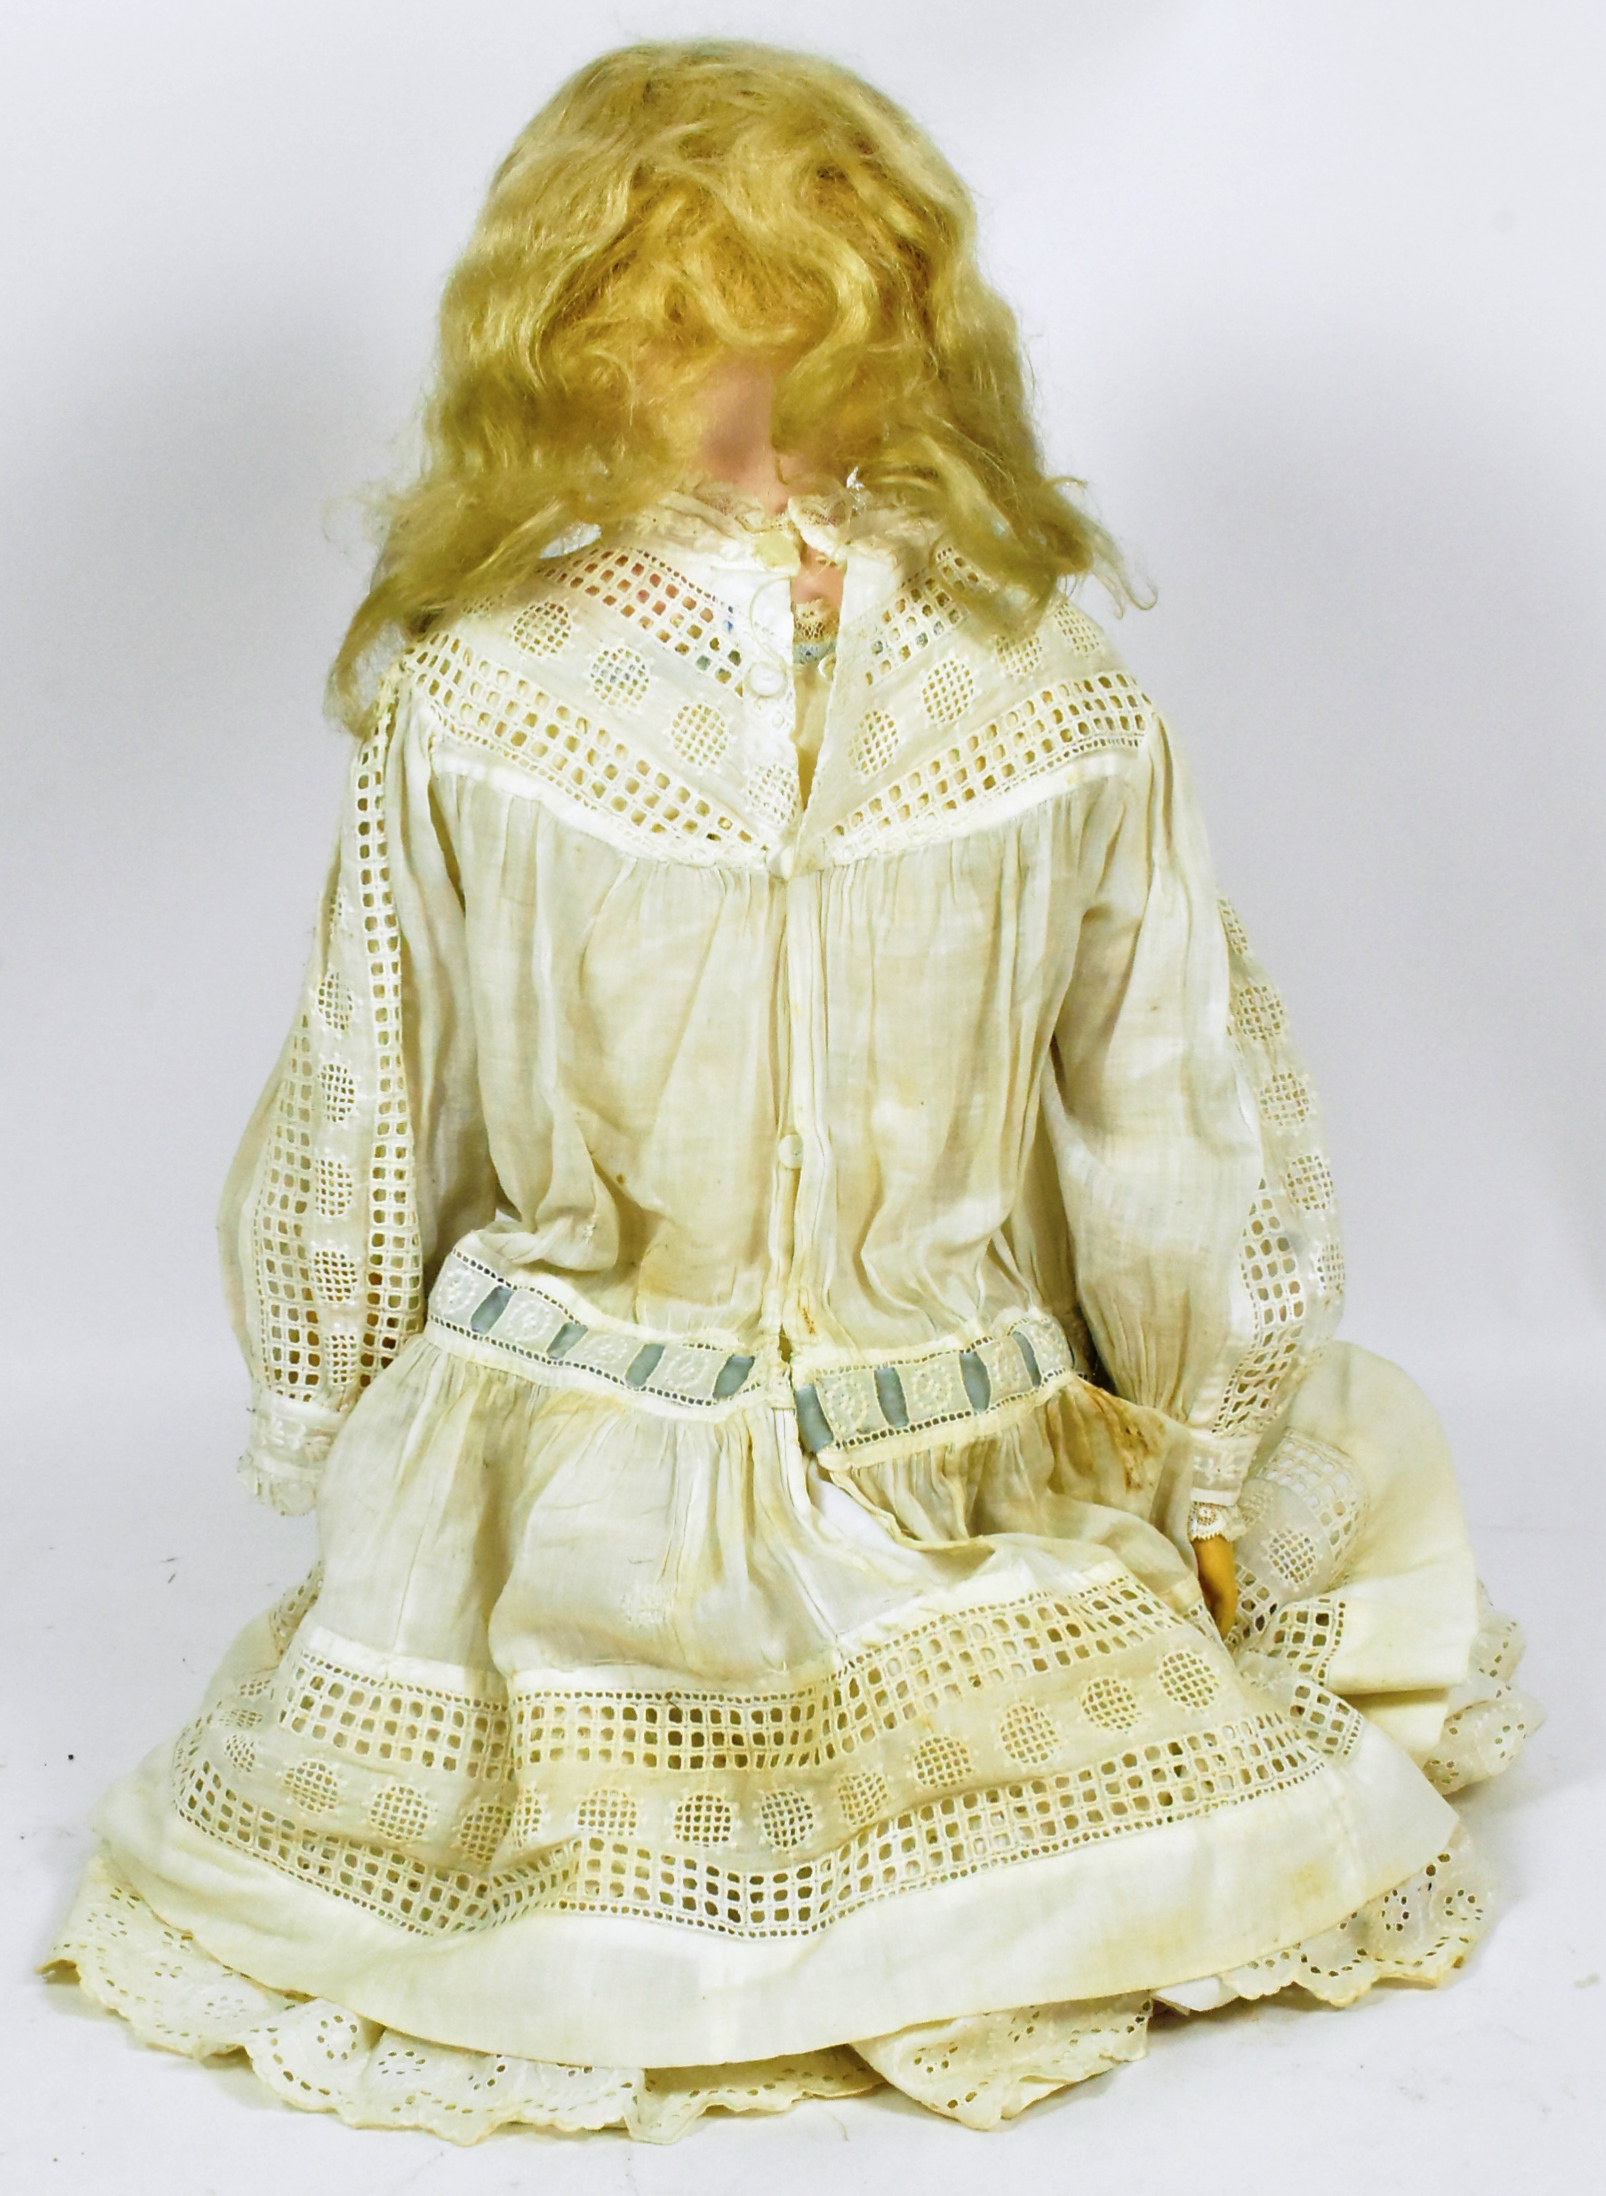 DOLL - 20TH CENTURY ANTIQUE STYLE PORCELAIN HEADED DOLL - Image 4 of 5